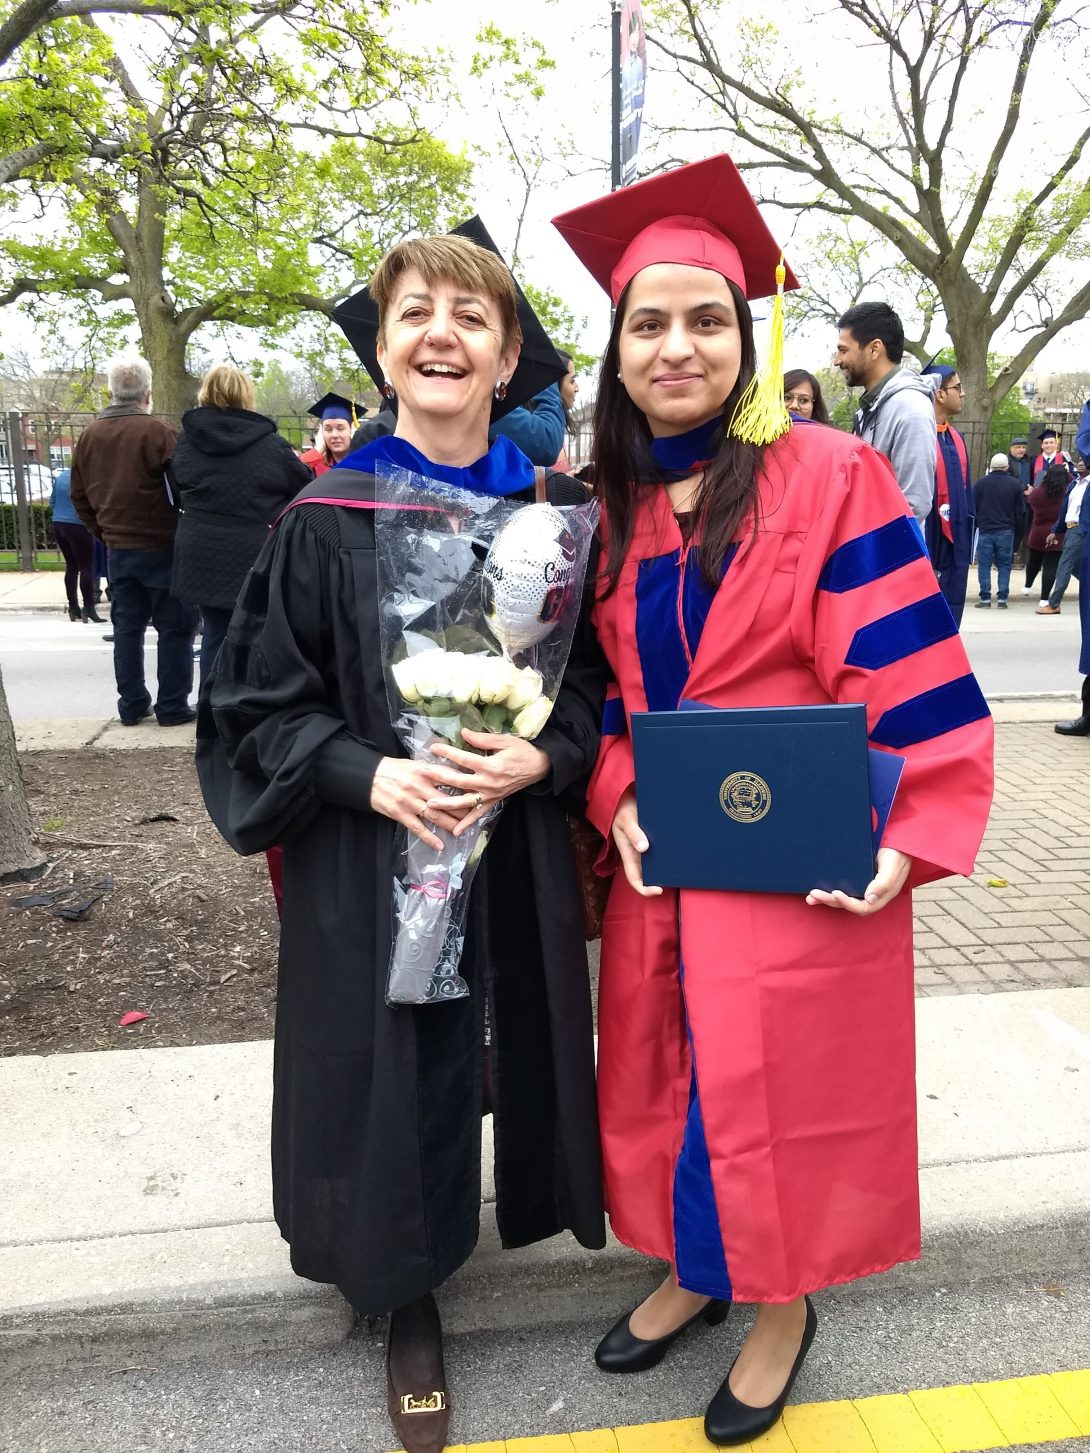 Professor Di Eugenio, who is holding flowers, standing next to Sabita, who is holding her diploma